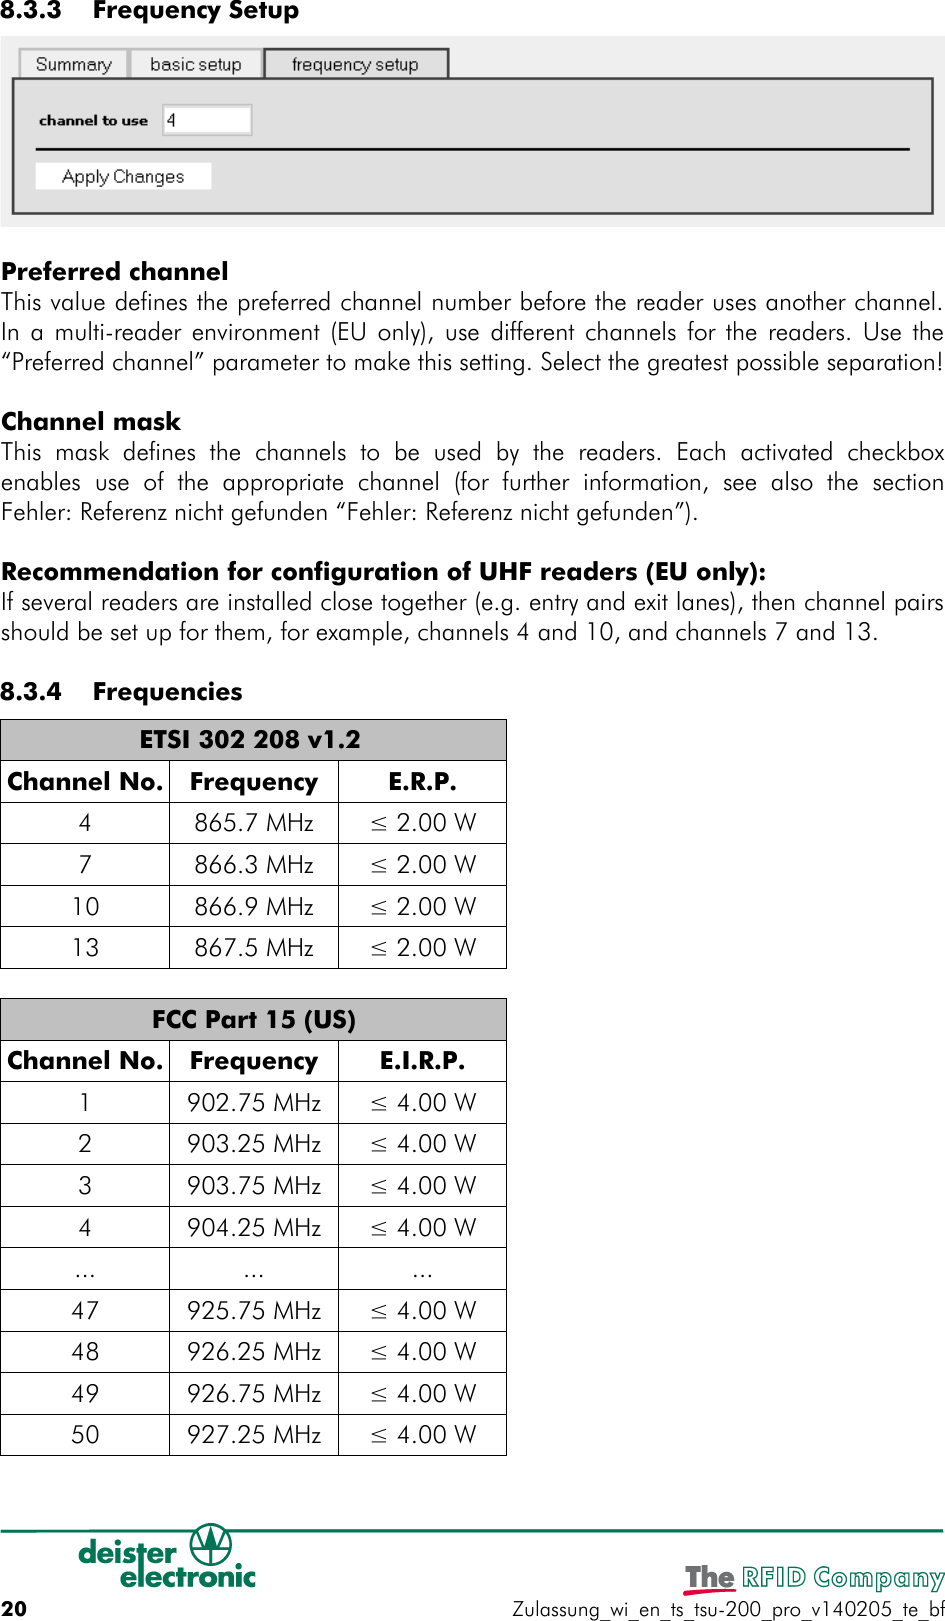  8.3.3  Frequency SetupPreferred channelThis value defines the preferred channel number before the reader uses another channel.In a multi-reader environment (EU only), use different channels for the readers. Use the“Preferred channel” parameter to make this setting. Select the greatest possible separation!Channel maskThis  mask   defines  the   channels to   be  used  by   the  readers.   Each activated   checkboxenables  use   of  the   appropriate  channel  (for  further   information,  see  also the   sectionFehler: Referenz nicht gefunden “Fehler: Referenz nicht gefunden”).Recommendation for configuration of UHF readers (EU only):If several readers are installed close together (e.g. entry and exit lanes), then channel pairsshould be set up for them, for example, channels 4 and 10, and channels 7 and 13. 8.3.4  FrequenciesETSI 302 208 v1.2 Channel No. Frequency E.R.P.4 865.7 MHz ≤ 2.00 W7 866.3 MHz ≤ 2.00 W10 866.9 MHz ≤ 2.00 W13 867.5 MHz ≤ 2.00 WFCC Part 15 (US)Channel No. Frequency E.I.R.P.1 902.75 MHz ≤ 4.00 W2 903.25 MHz ≤ 4.00 W3 903.75 MHz ≤ 4.00 W4 904.25 MHz ≤ 4.00 W... ... ...47 925.75 MHz ≤ 4.00 W48 926.25 MHz ≤ 4.00 W49 926.75 MHz ≤ 4.00 W50 927.25 MHz ≤ 4.00 W20 Zulassung_wi_en_ts_tsu-200_pro_v140205_te_bf